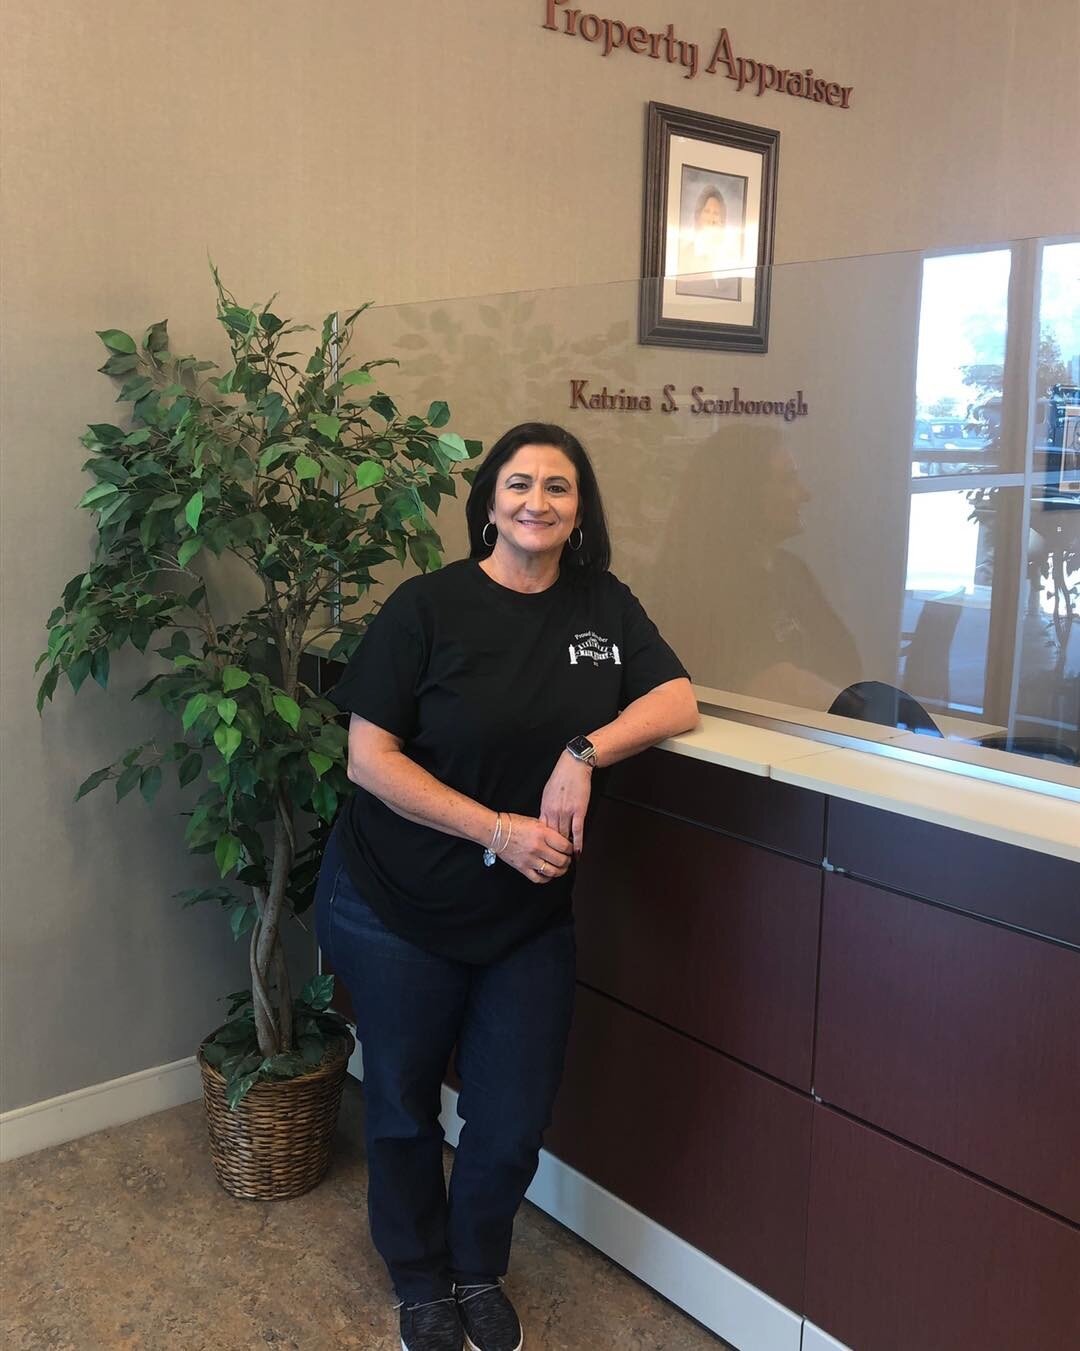 Thank you to @Kissimmee Property Appraiser, Katrina Scarborough for her continued support of Kissimmee Main Street through both her membership and event involvement.
We appreciate you.  #appraiser #kissimmee #kissimmeefl #kissimmeemainstreetmeansyou